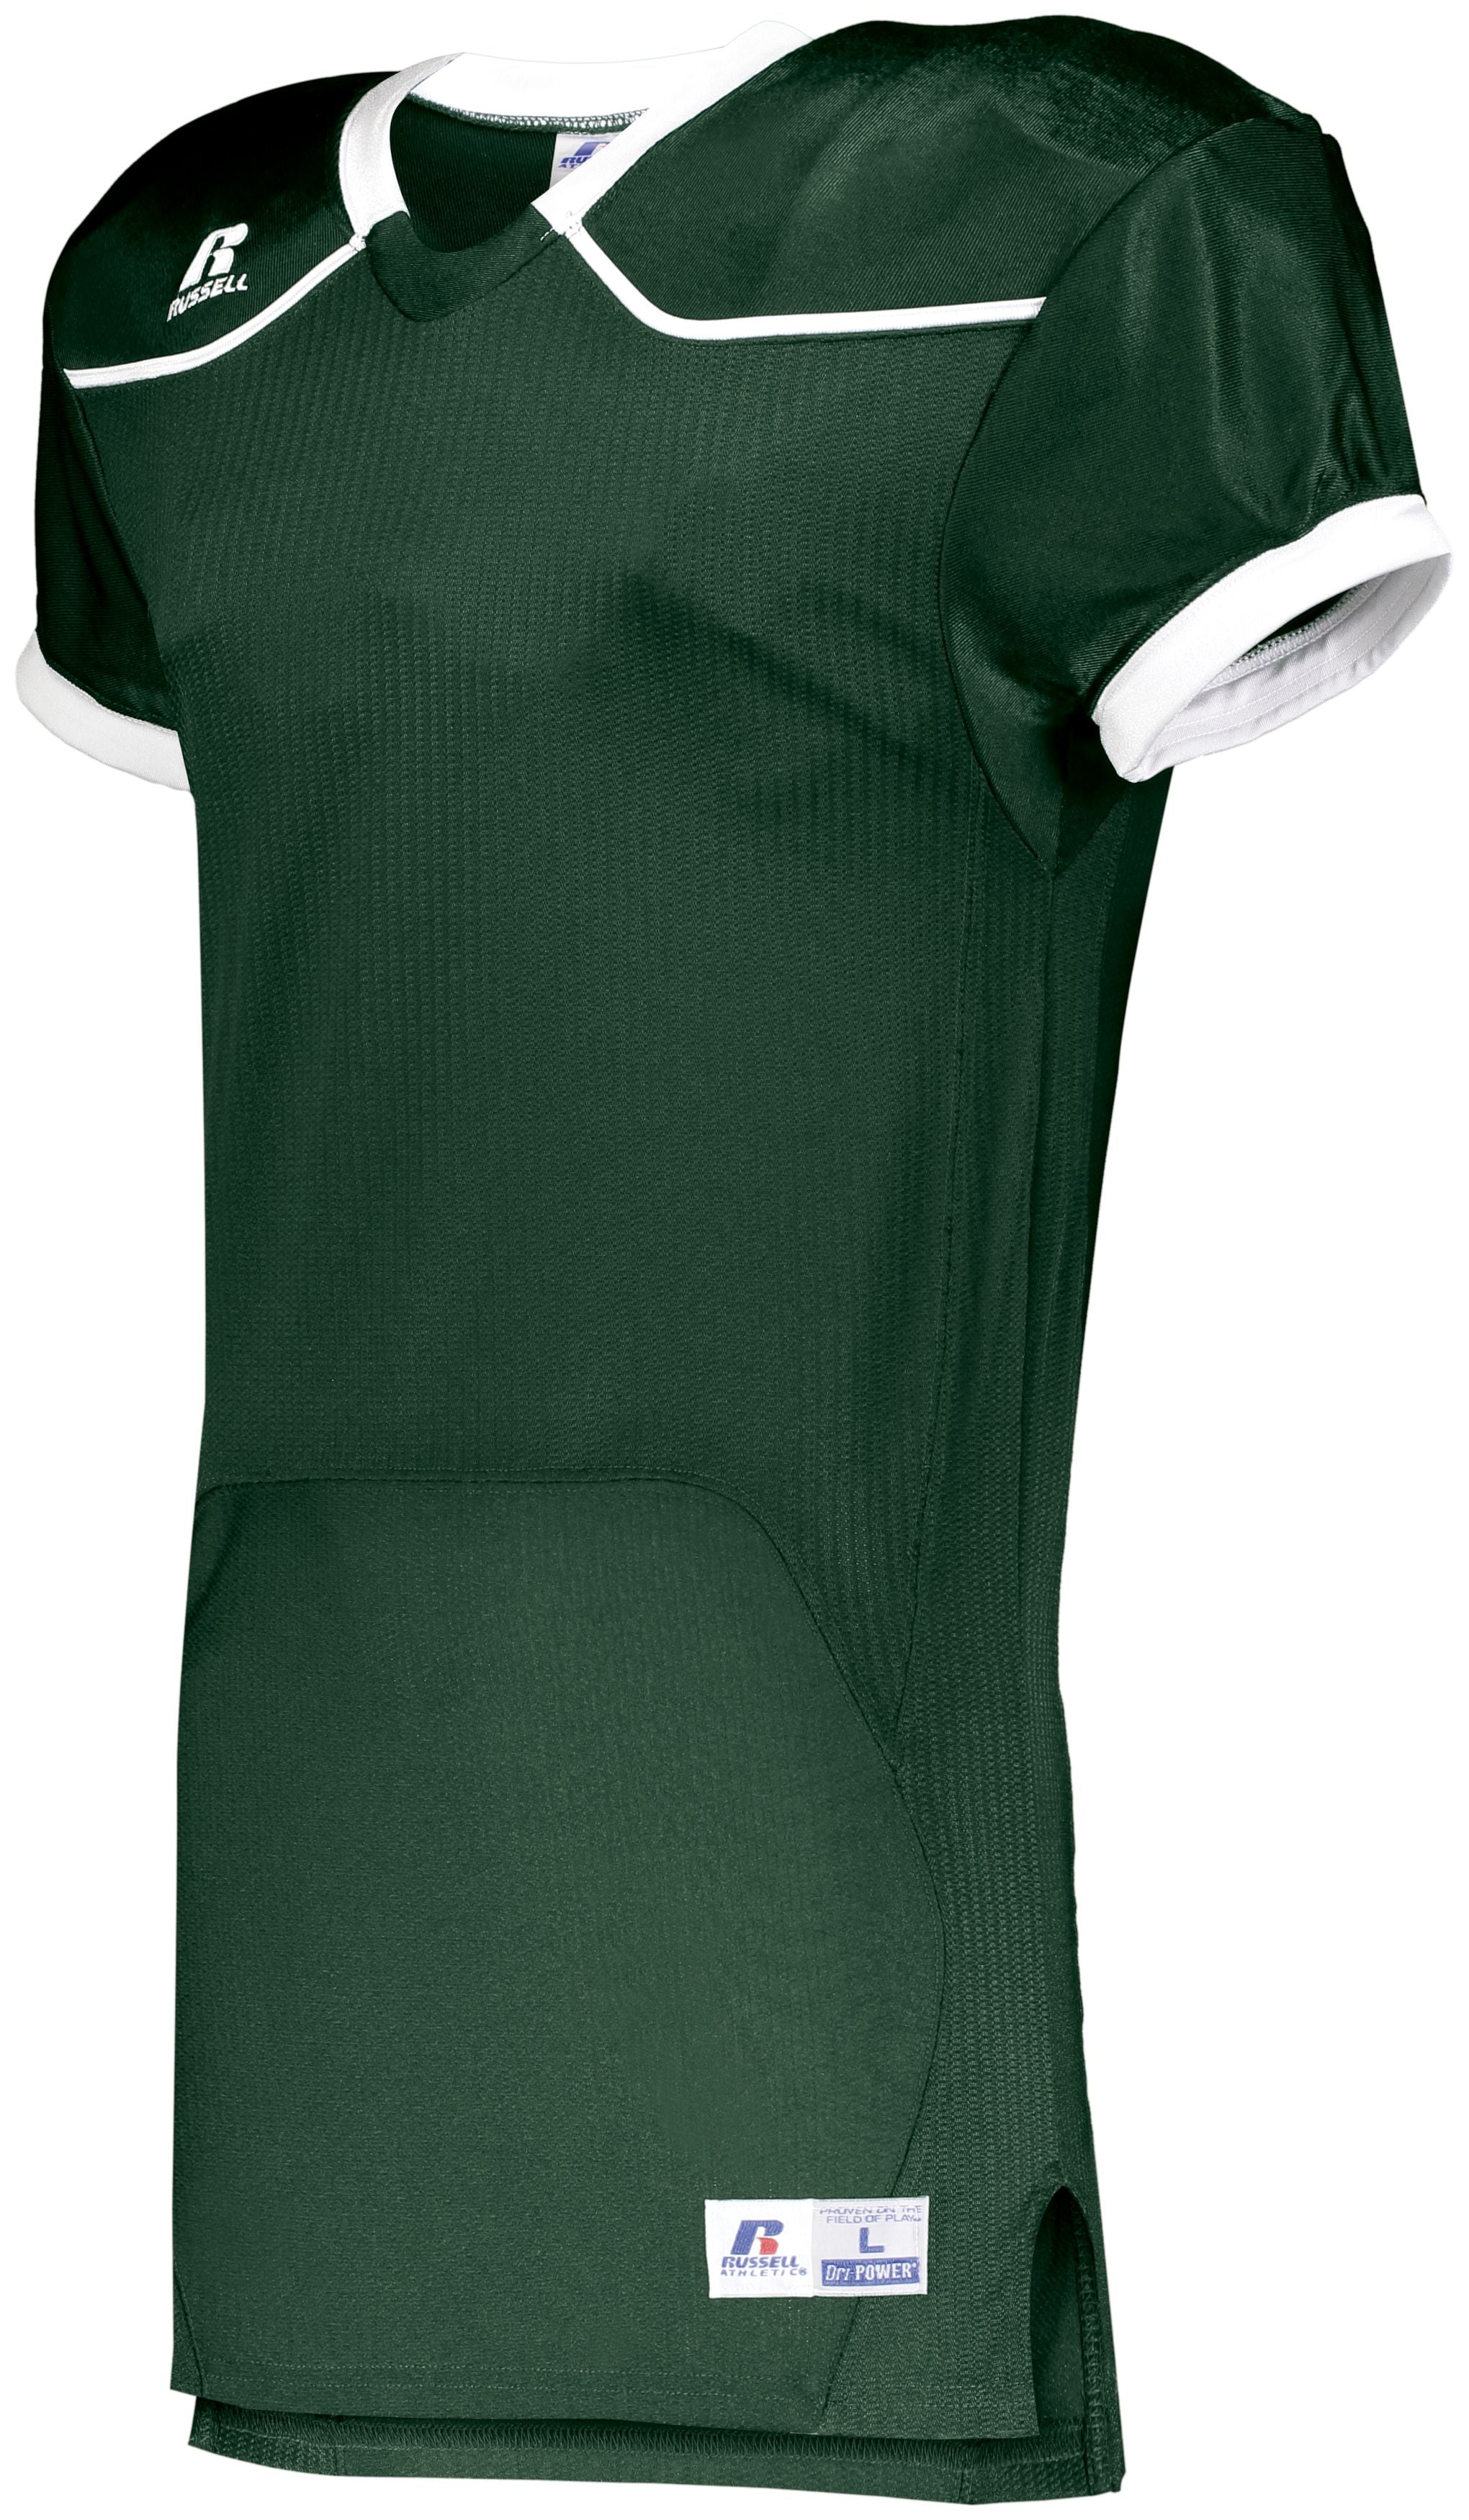 Russell Athletic Color Block Game Jersey (Home) in Dark Green/White  -Part of the Adult, Adult-Jersey, Football, Russell-Athletic-Products, Shirts, All-Sports, All-Sports-1 product lines at KanaleyCreations.com